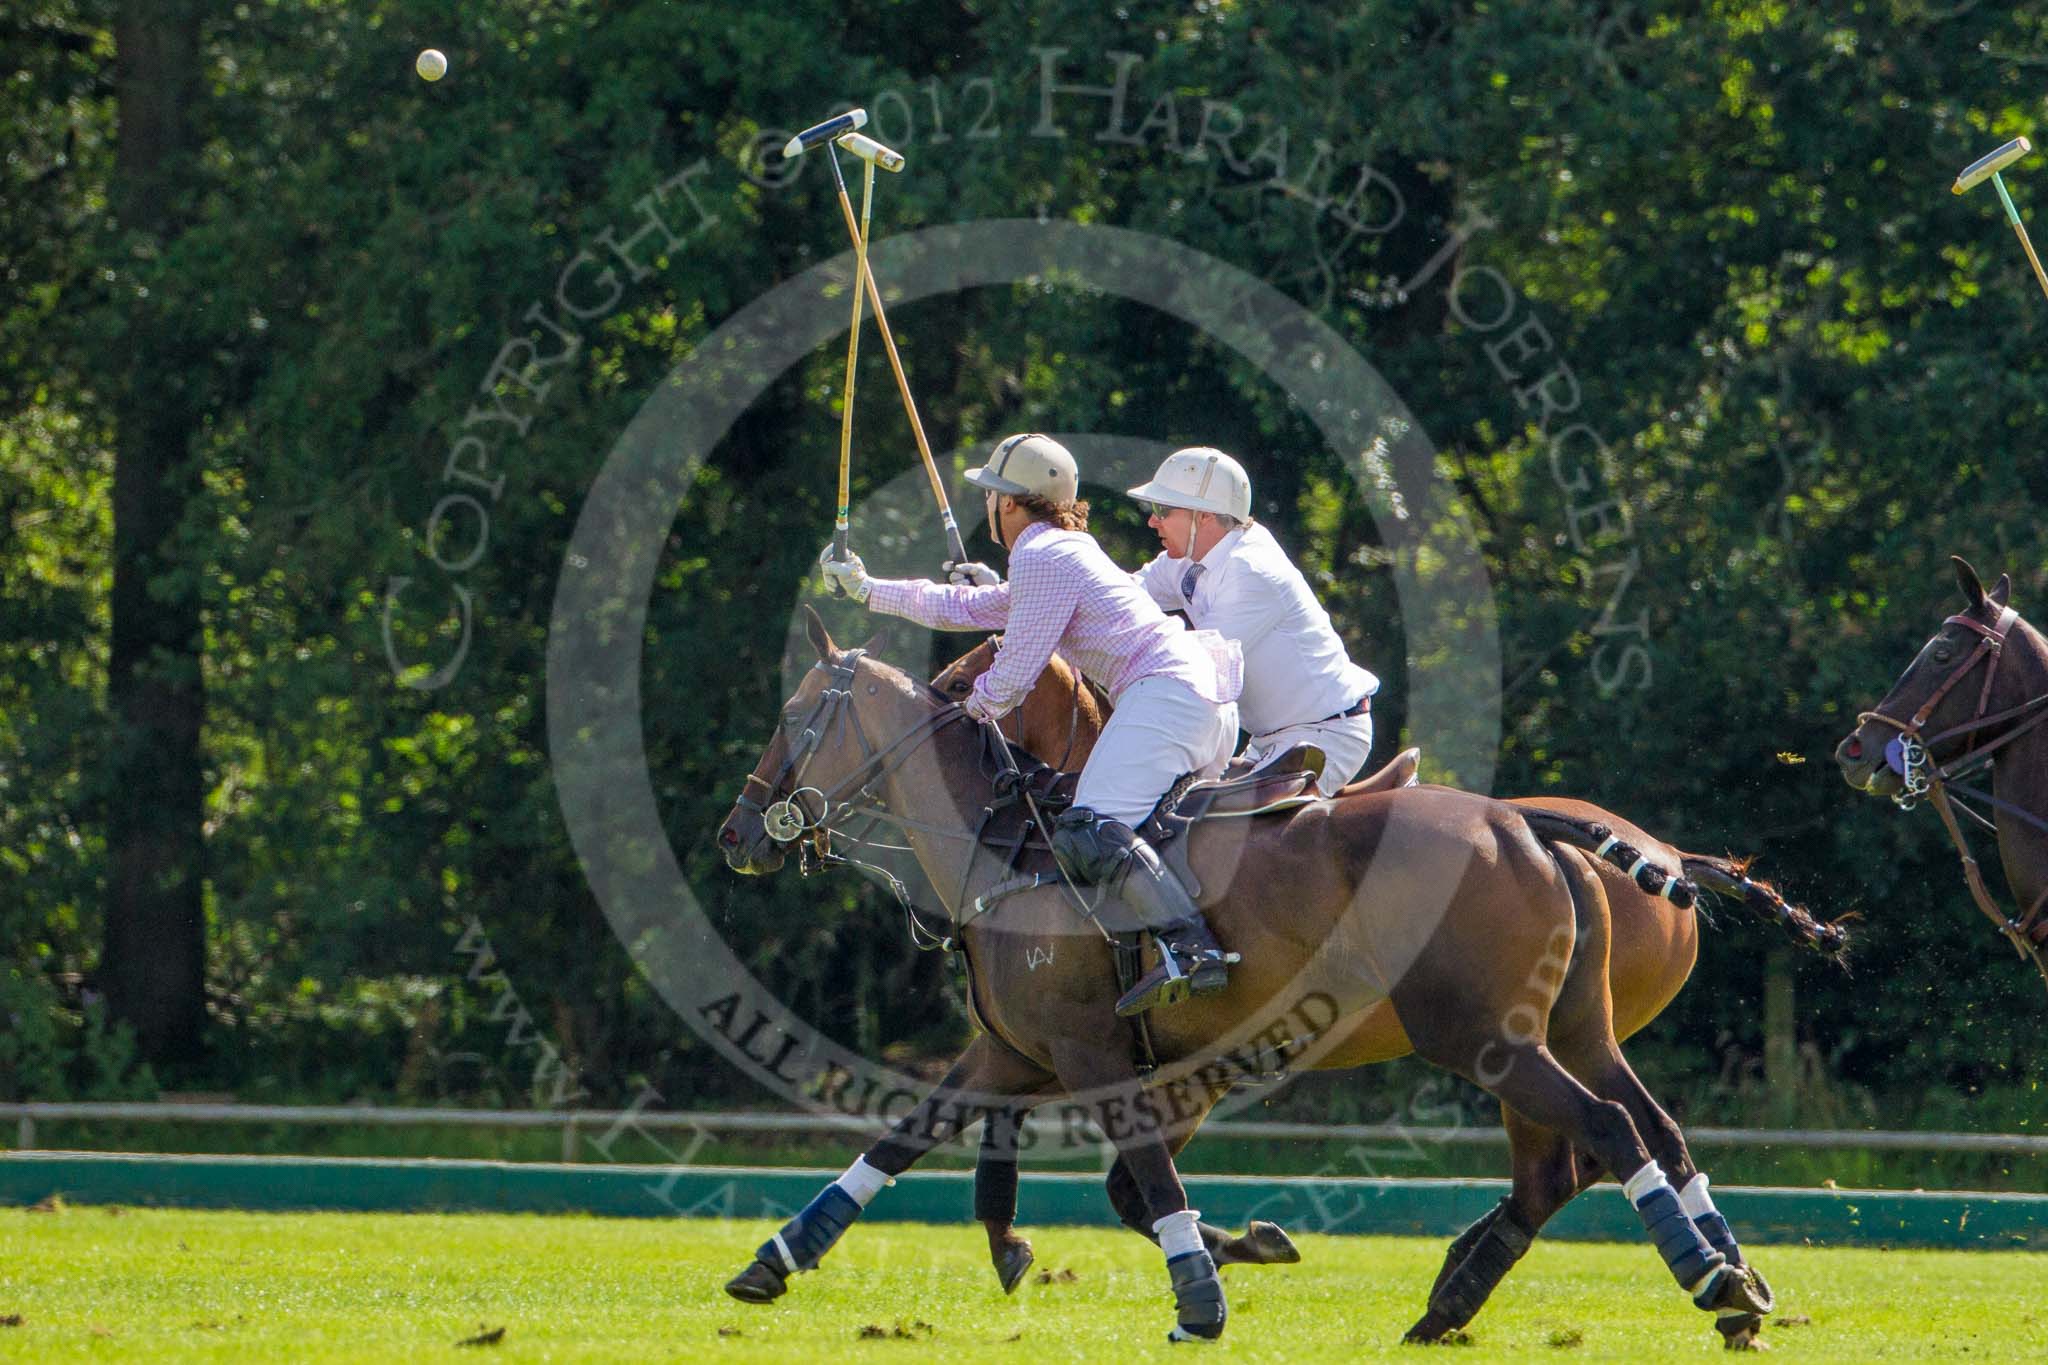 7th Heritage Polo Cup finals: Nico Tallamoni & Paul Oberschneider..
Hurtwood Park Polo Club,
Ewhurst Green,
Surrey,
United Kingdom,
on 05 August 2012 at 15:36, image #174